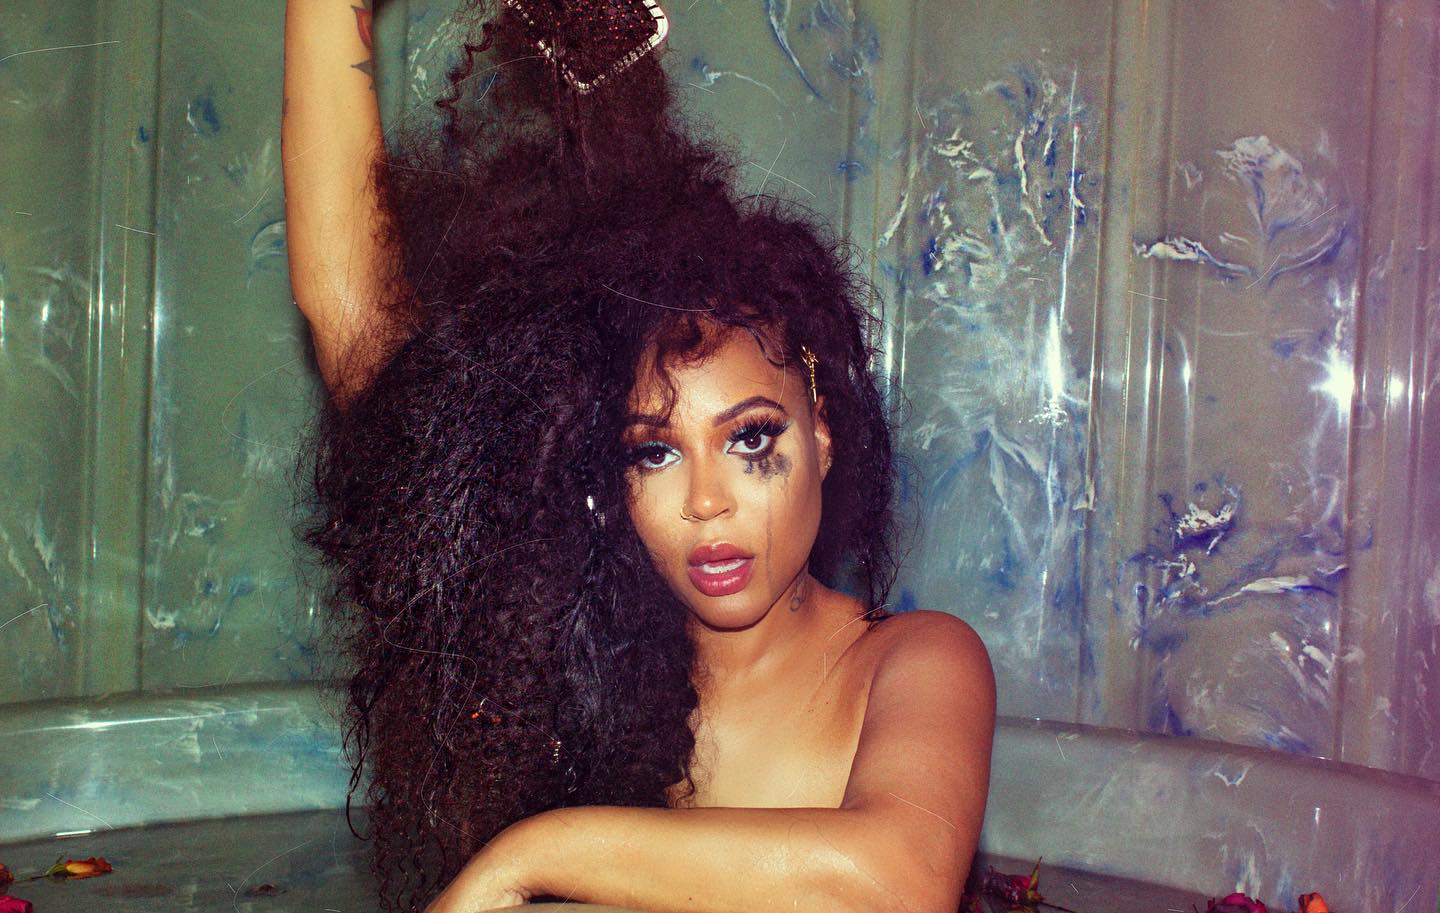 See Lyricia Anderson Has A ‘Bad Hair Day’ On New Album Tracklist